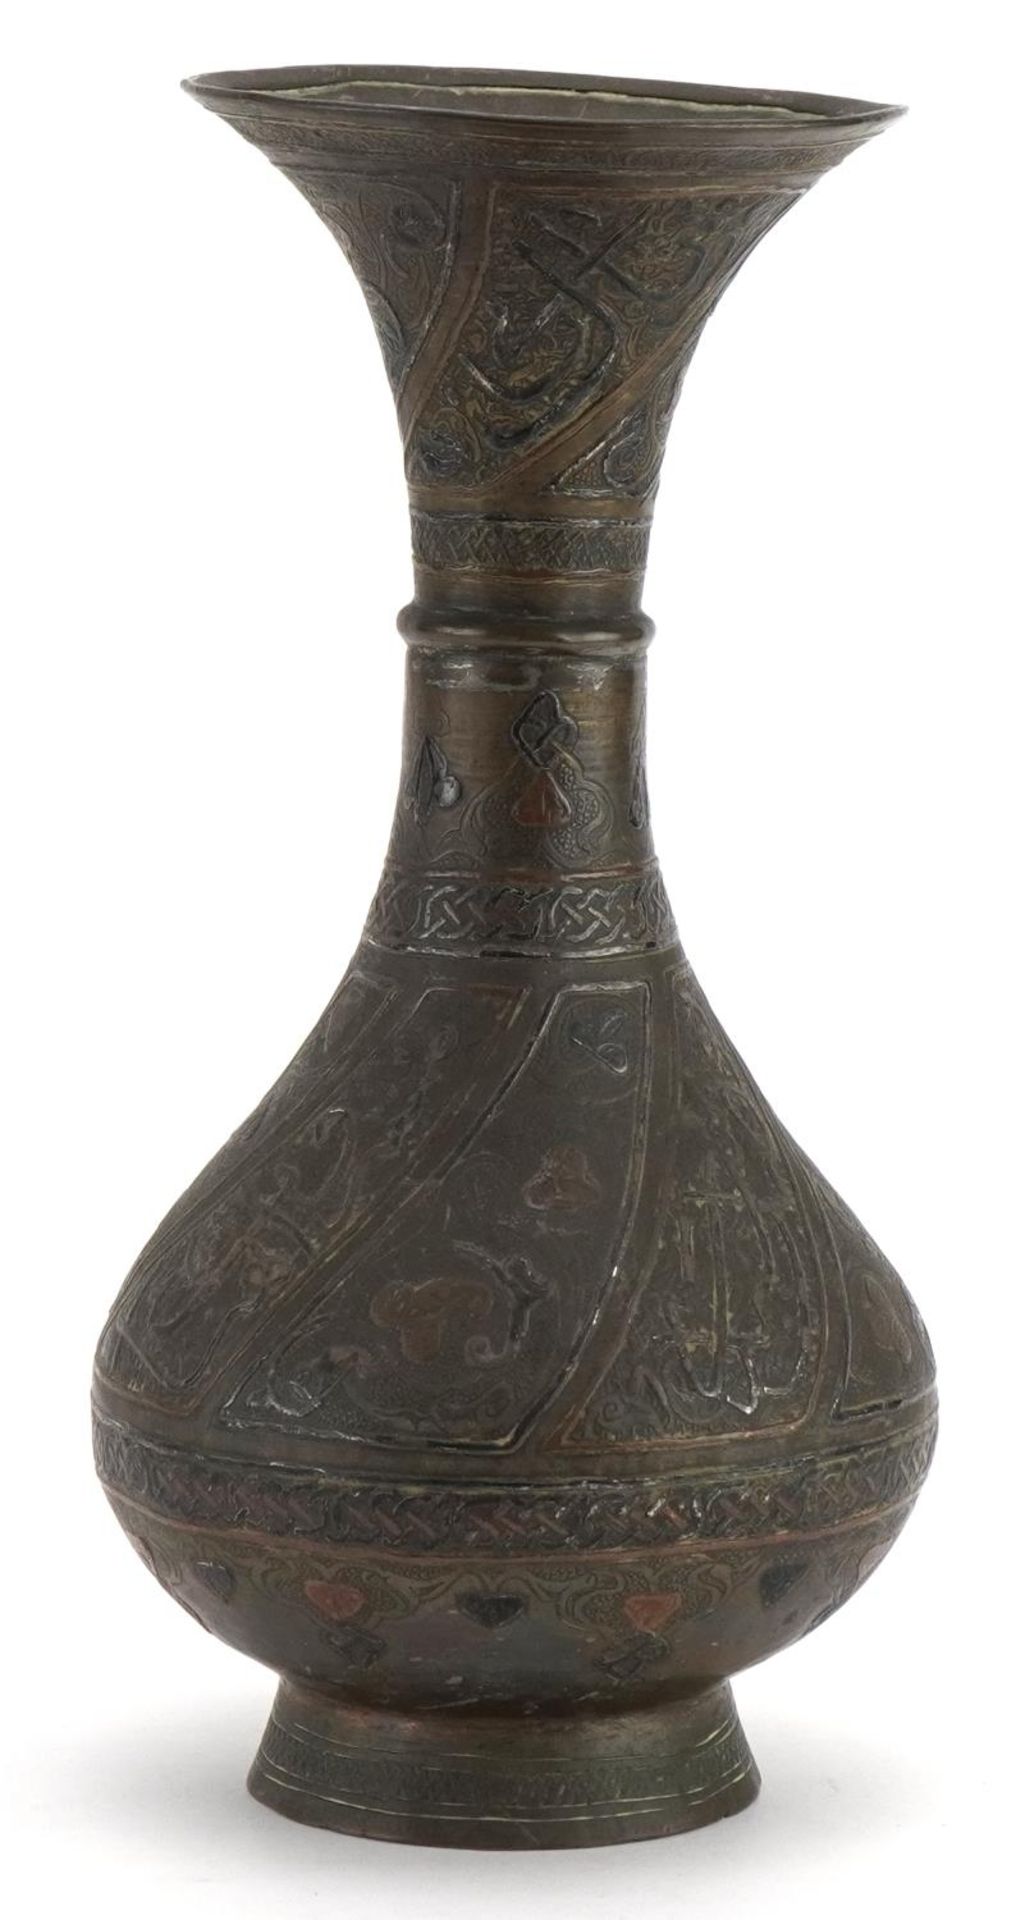 Islamic Cairoware brass vase with silver and copper inlay decorated with calligraphy and flowers,